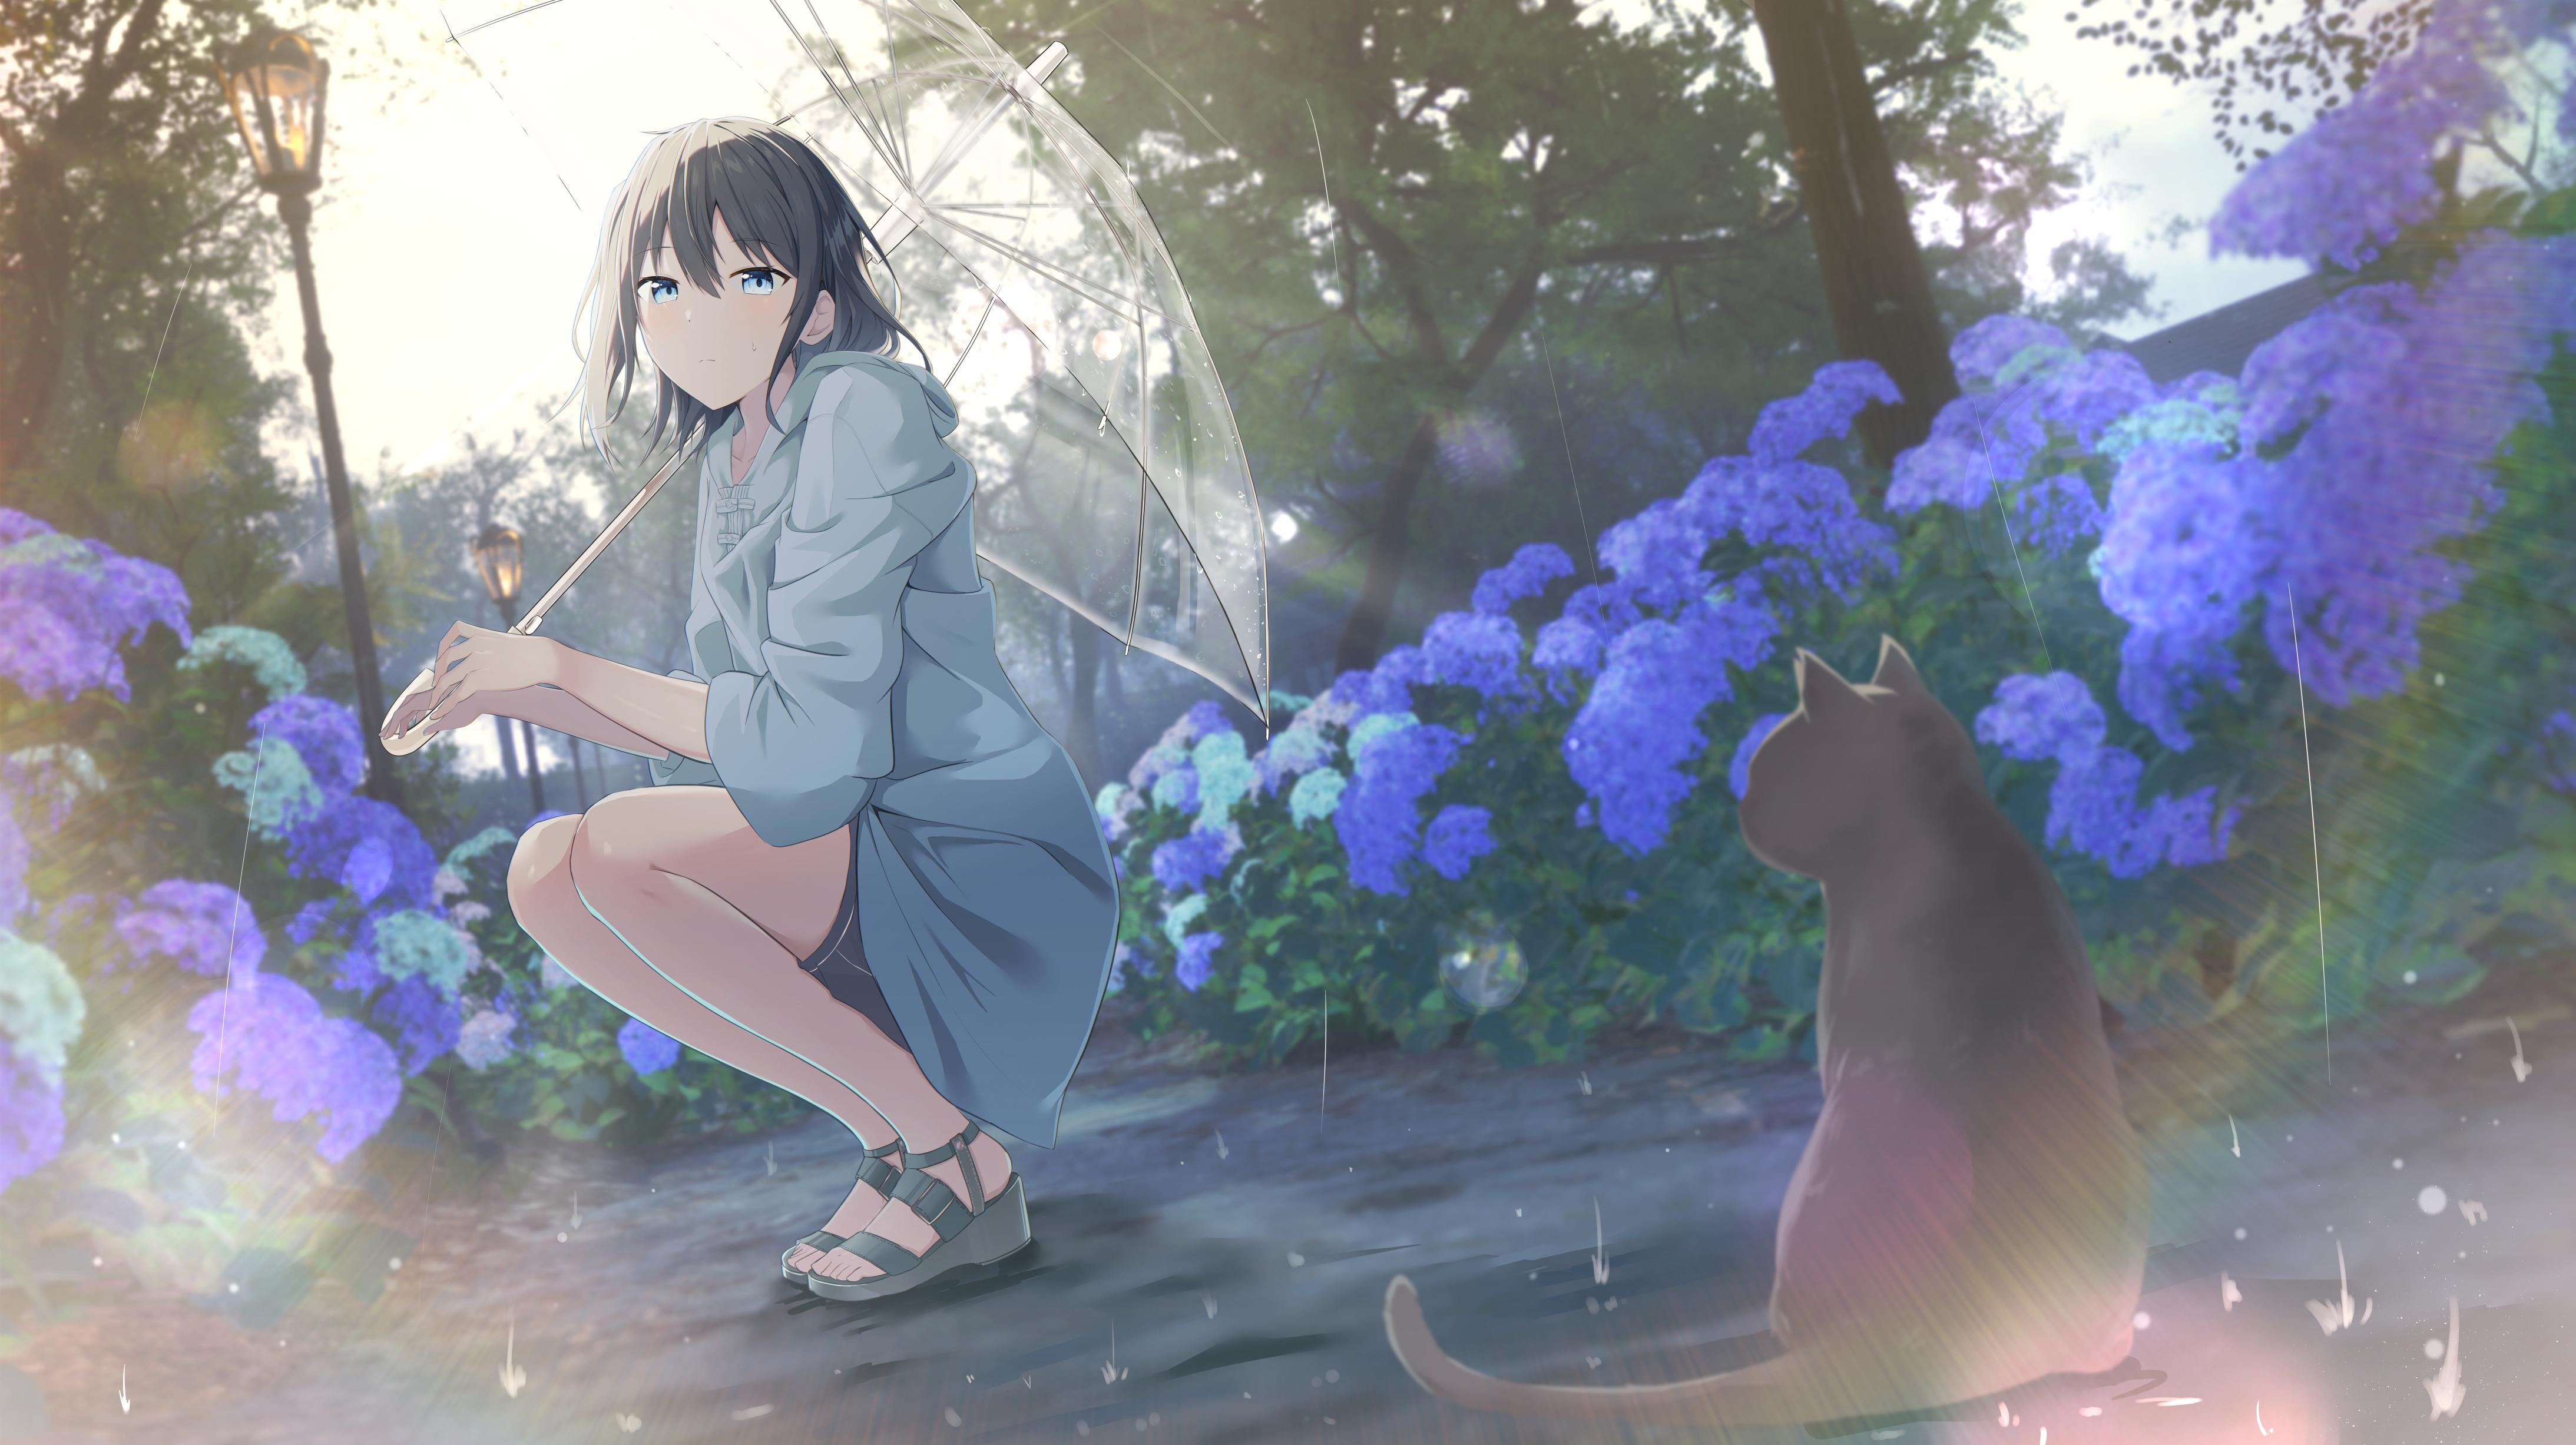 Anime 4374x2454 anime girls squatting rain looking at viewer animals blue flowers flowers outdoors cats water drops long hair black hair blue eyes umbrella trees street light cac itinose leaves sunlight path rainbows